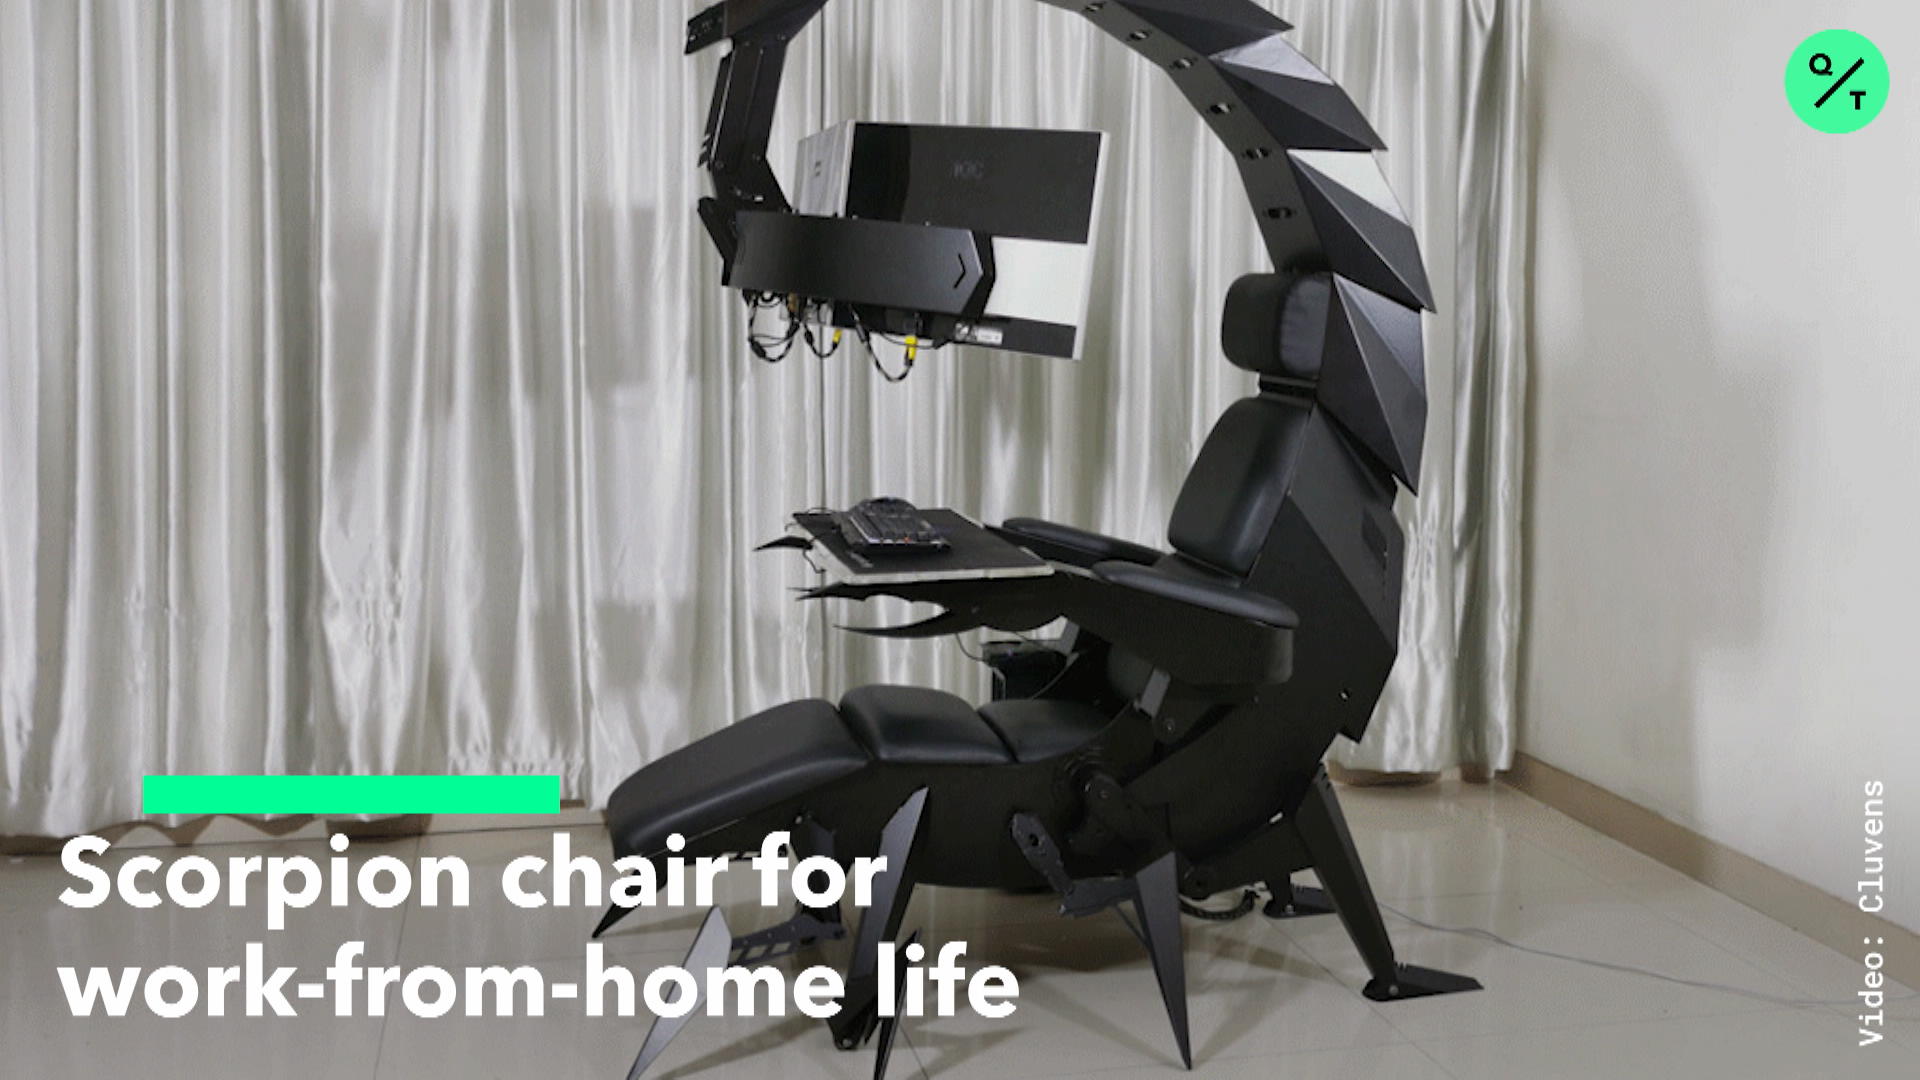 Watch Scorpion Chair for Work-From-Home Life - Bloomberg